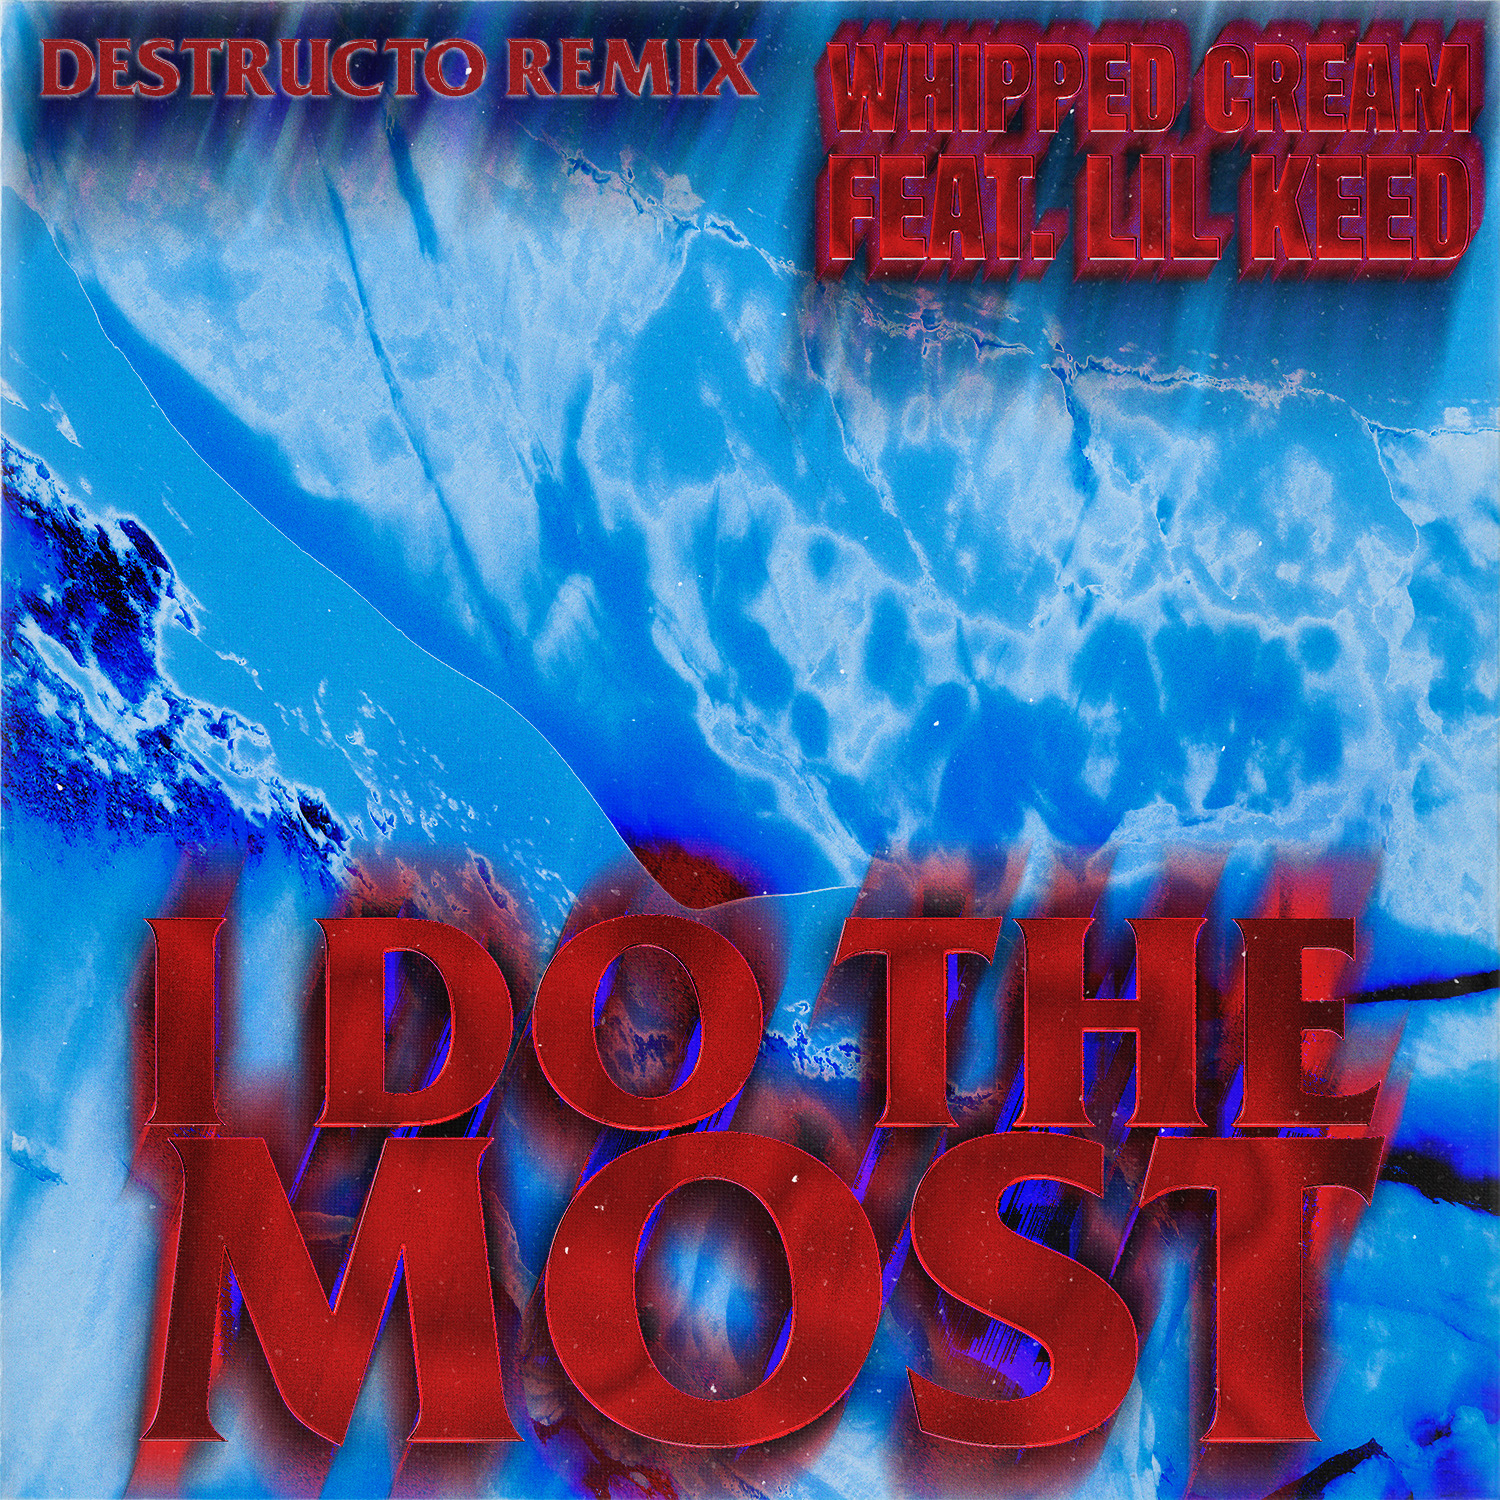 Whipped Cream feat. Lil Keed “I Do The Most” Destructo Remix